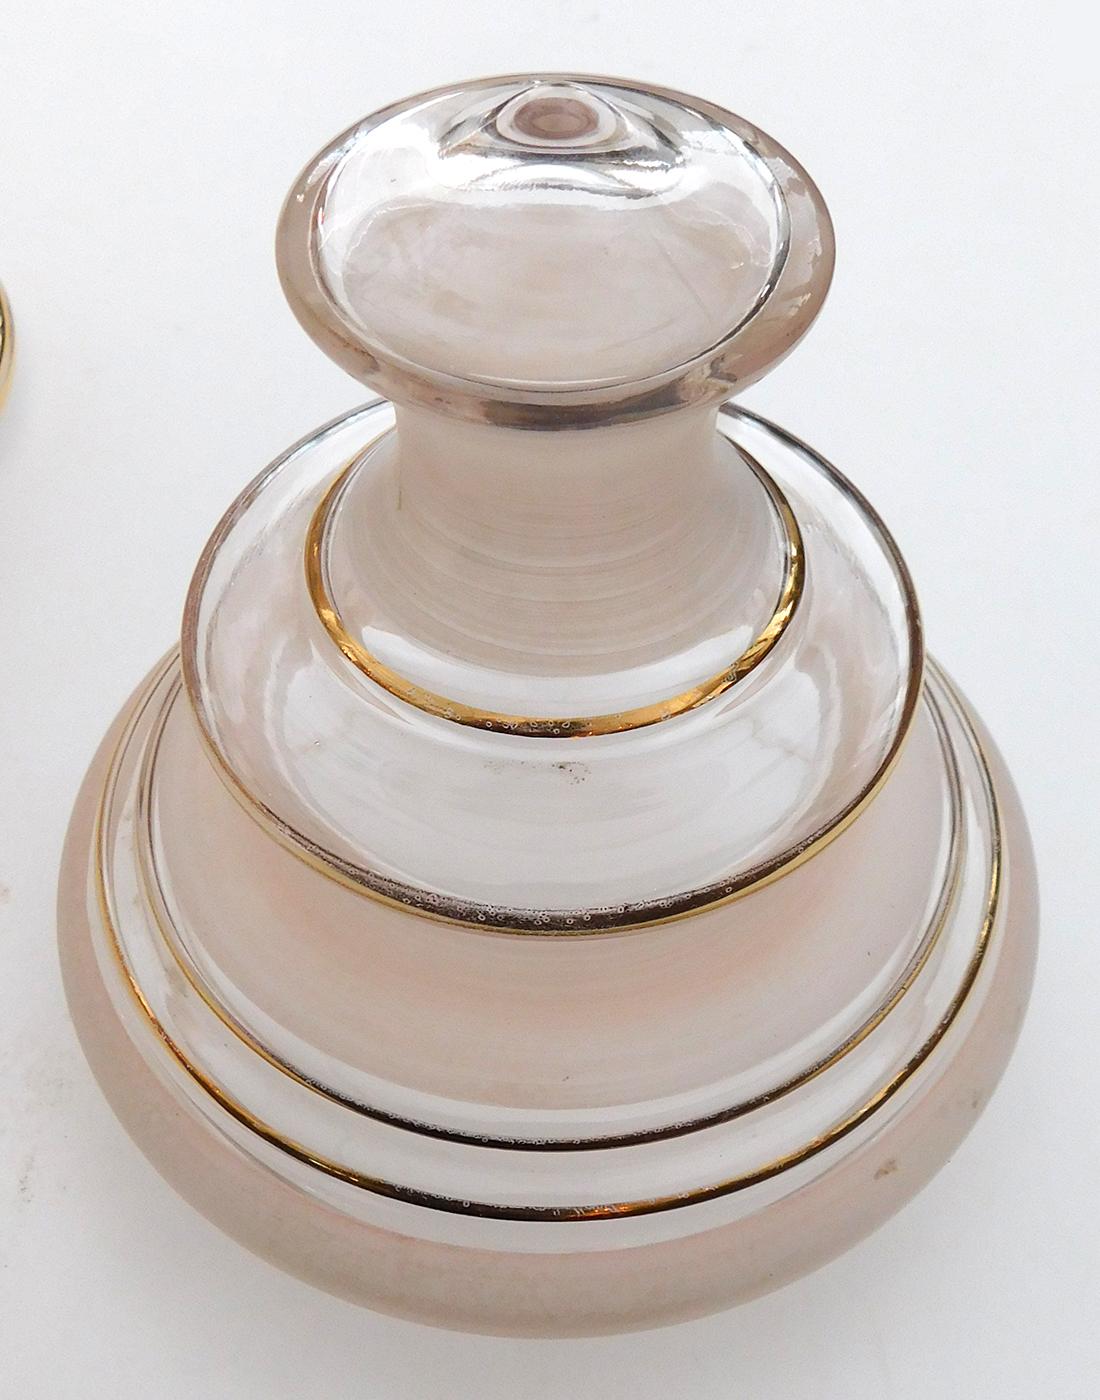 each with shaped lid over a cylindrical body all in alternating clear and frosted glass with hand-painted foliate perimeter bands with gilt highlights; overall even wear with rubbing to gilded surface.